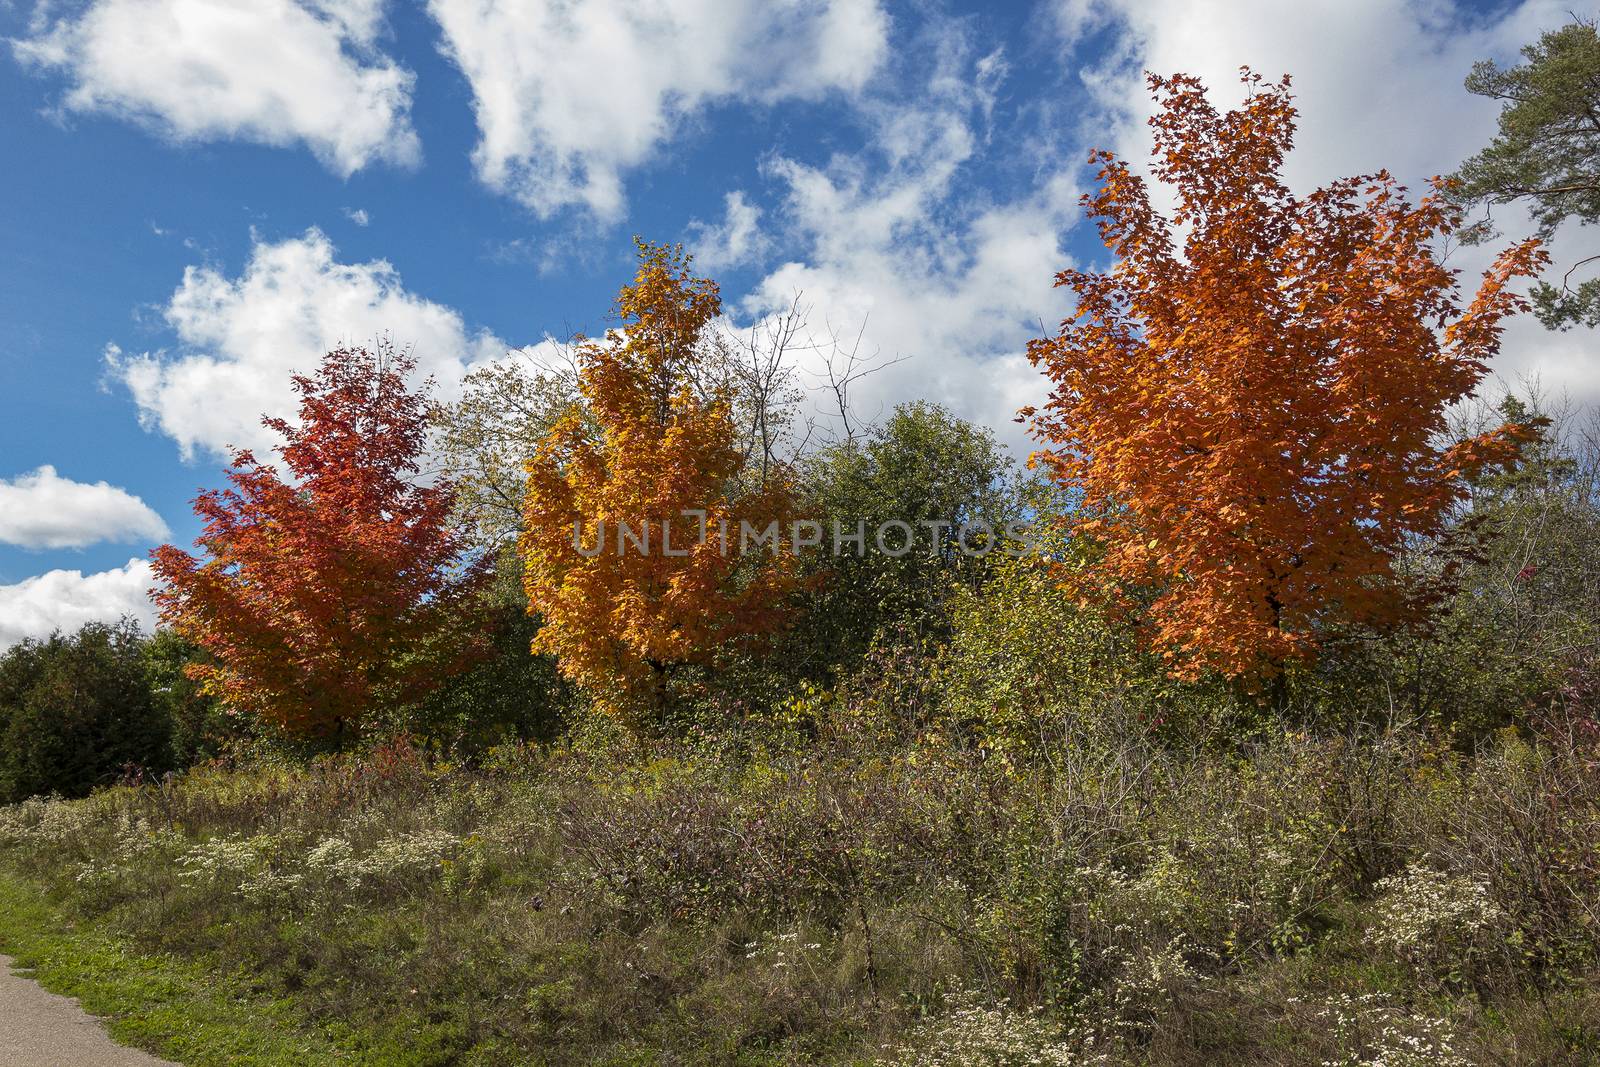 Three autumn maples near the road against blue sky and white clouds